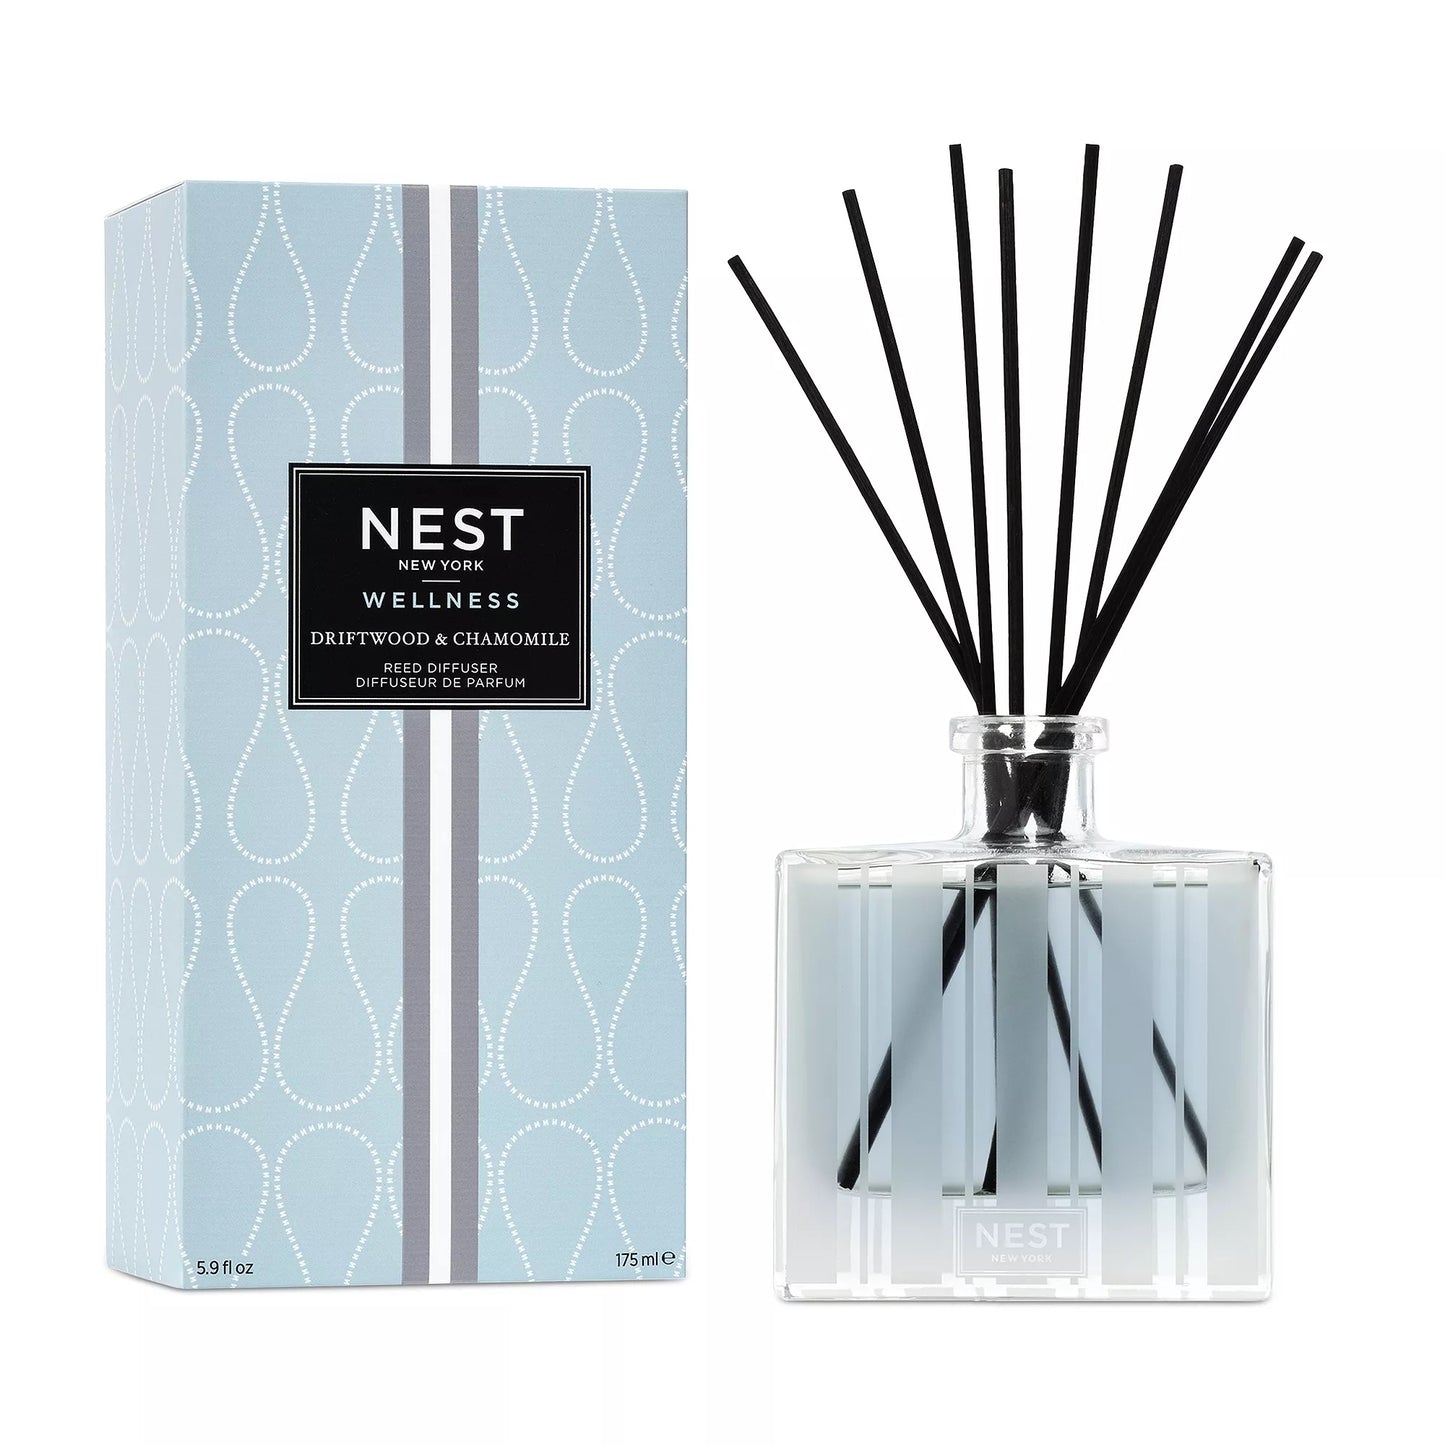 NEST / Reed Diffuser